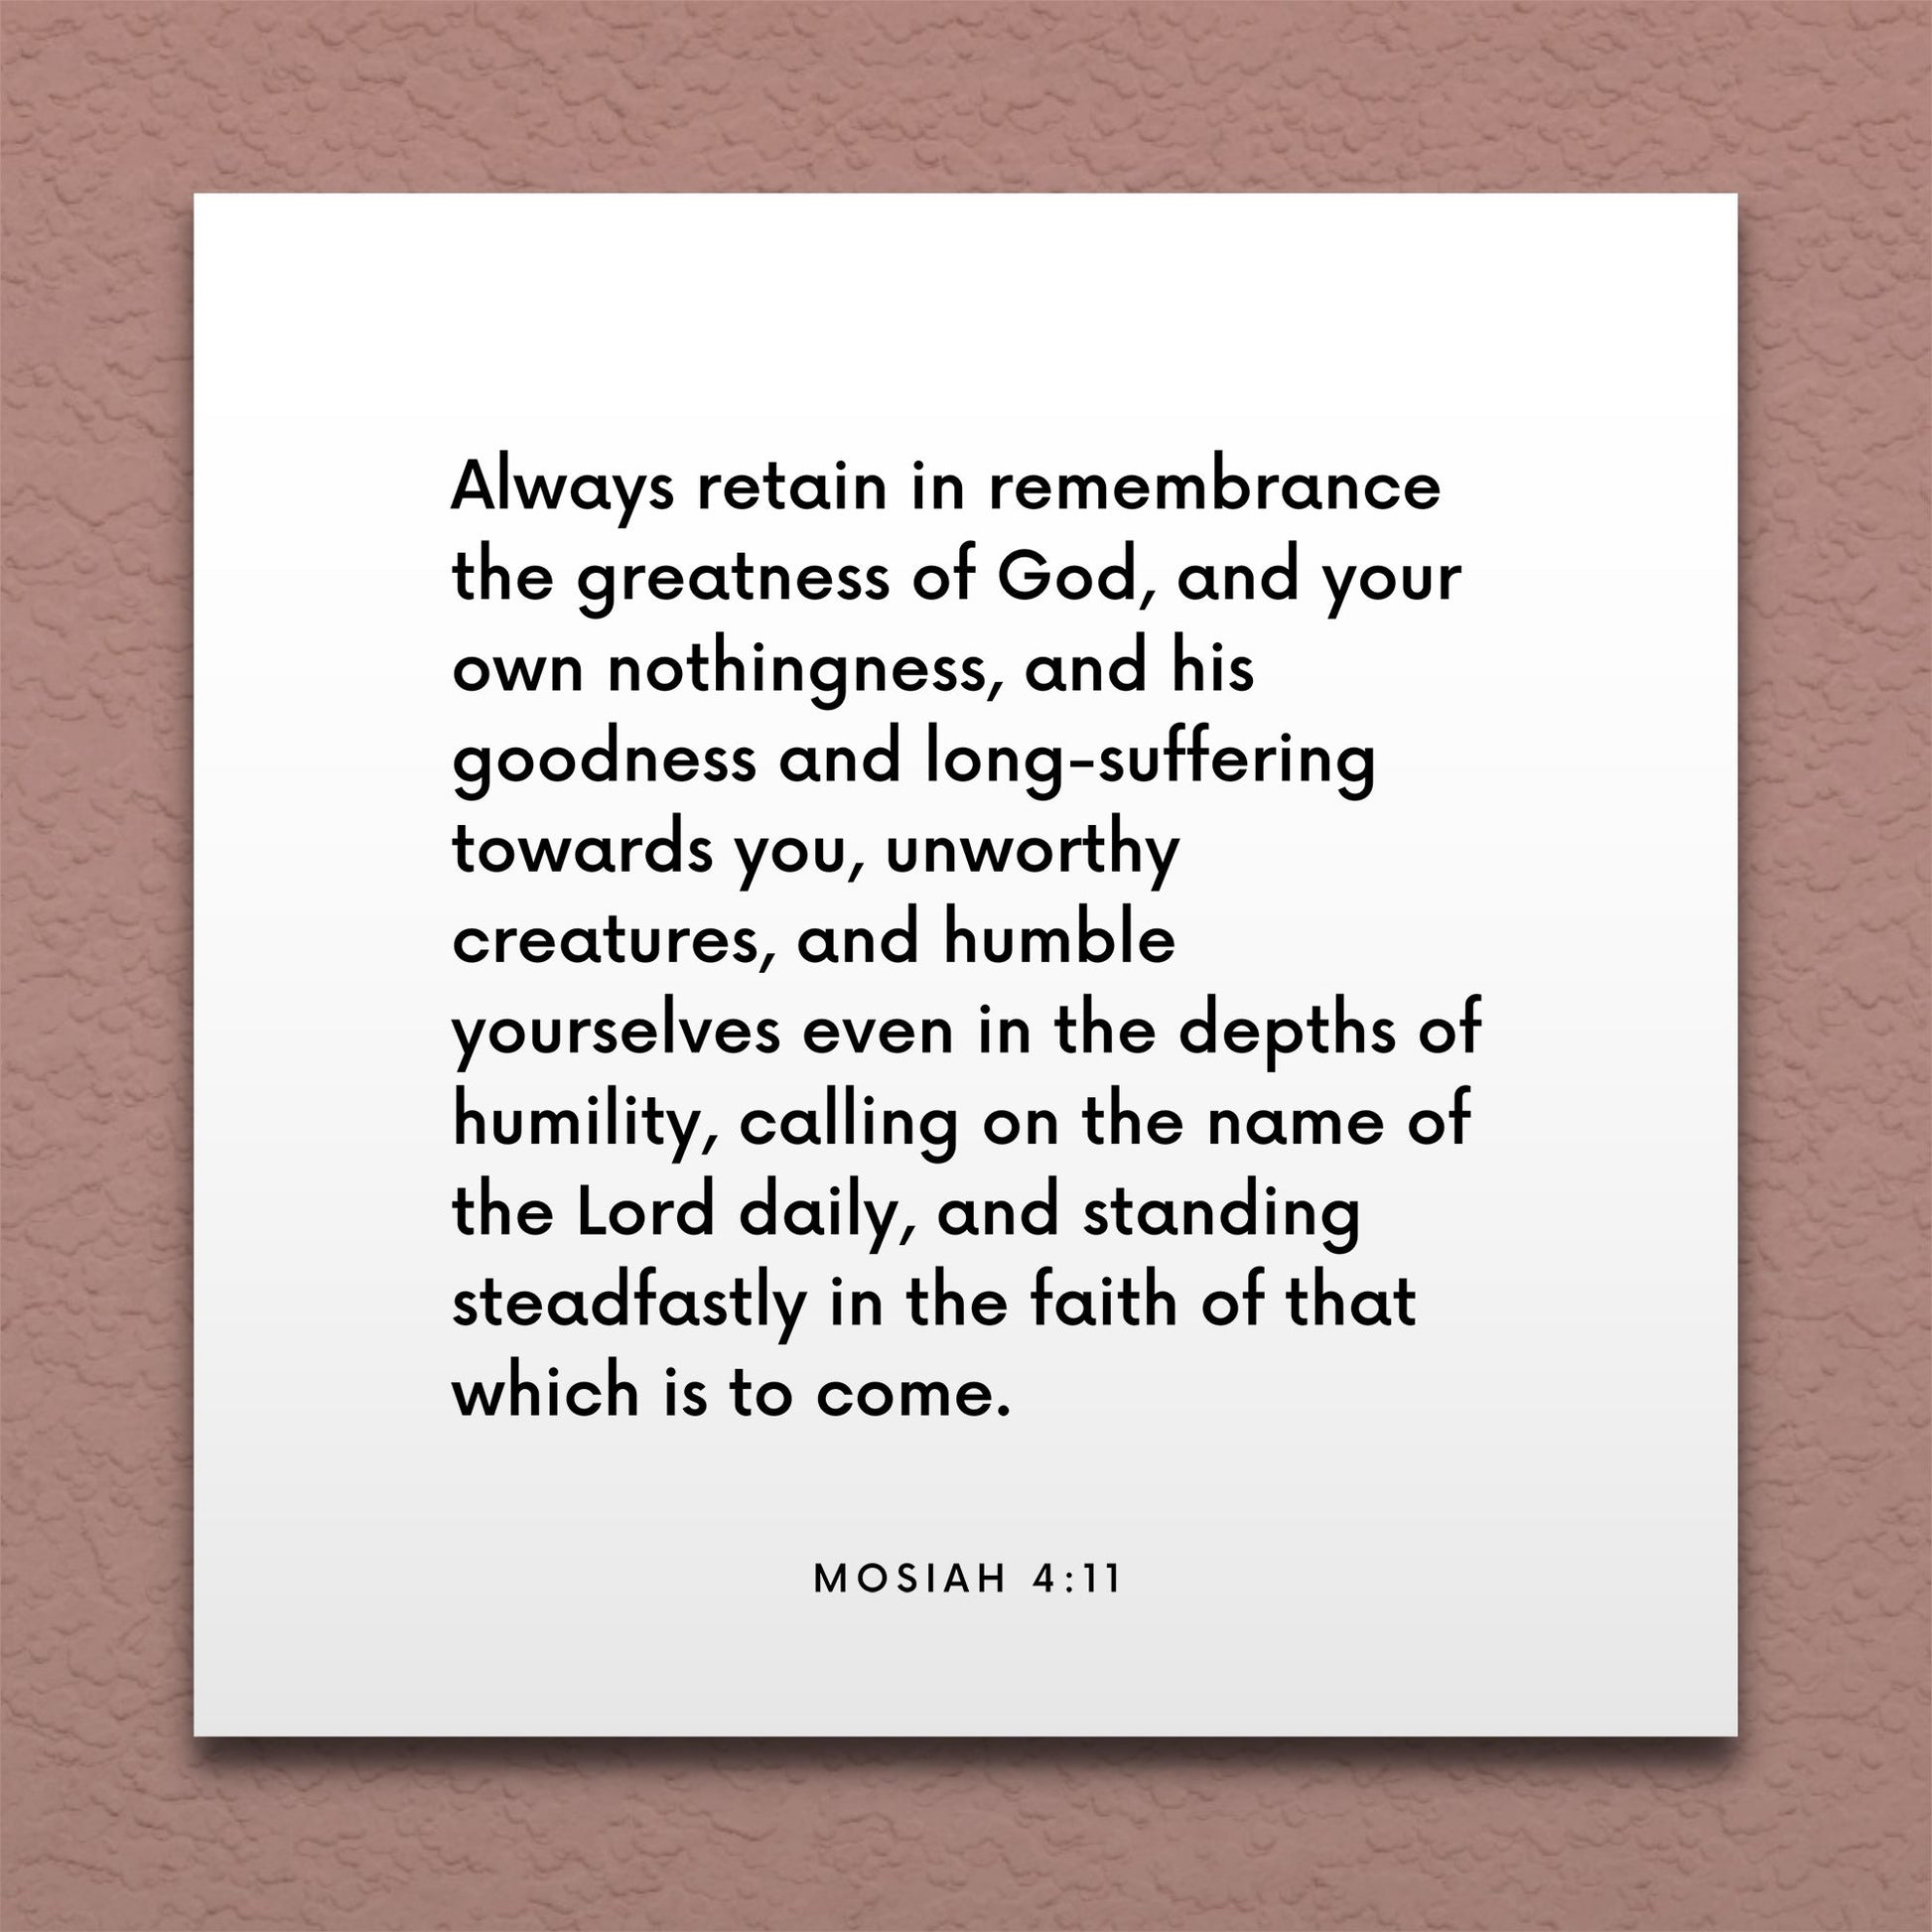 Wall-mounted scripture tile for Mosiah 4:11 - "Always retain in remembrance the greatness of God"